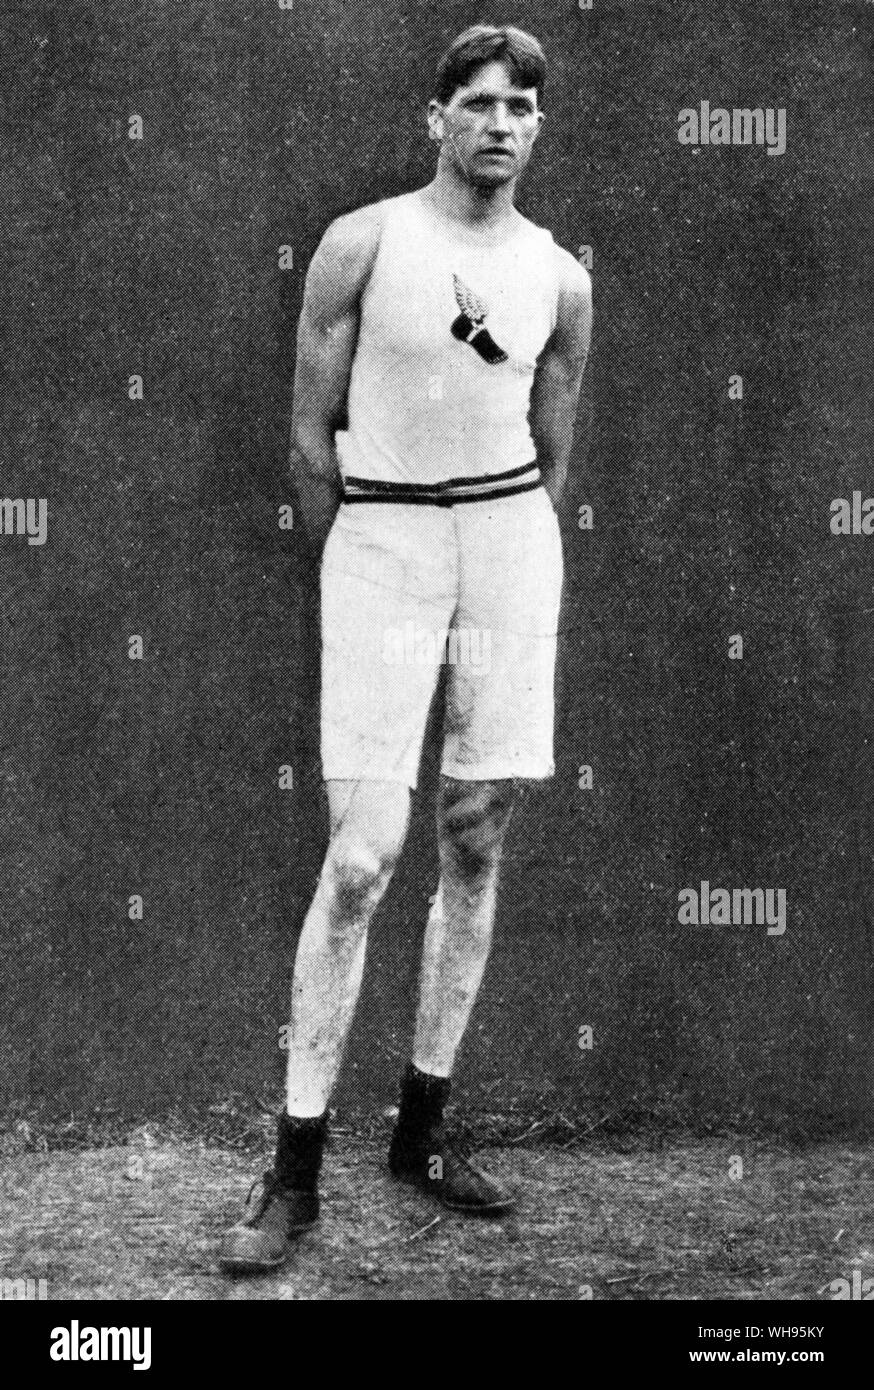 Ray Ewry (1873-1937): American track-and-field athlete, who won a total of 10 gold medals at the Olympic Games in 1900, 1904, 1906, and 1908. Stock Photo